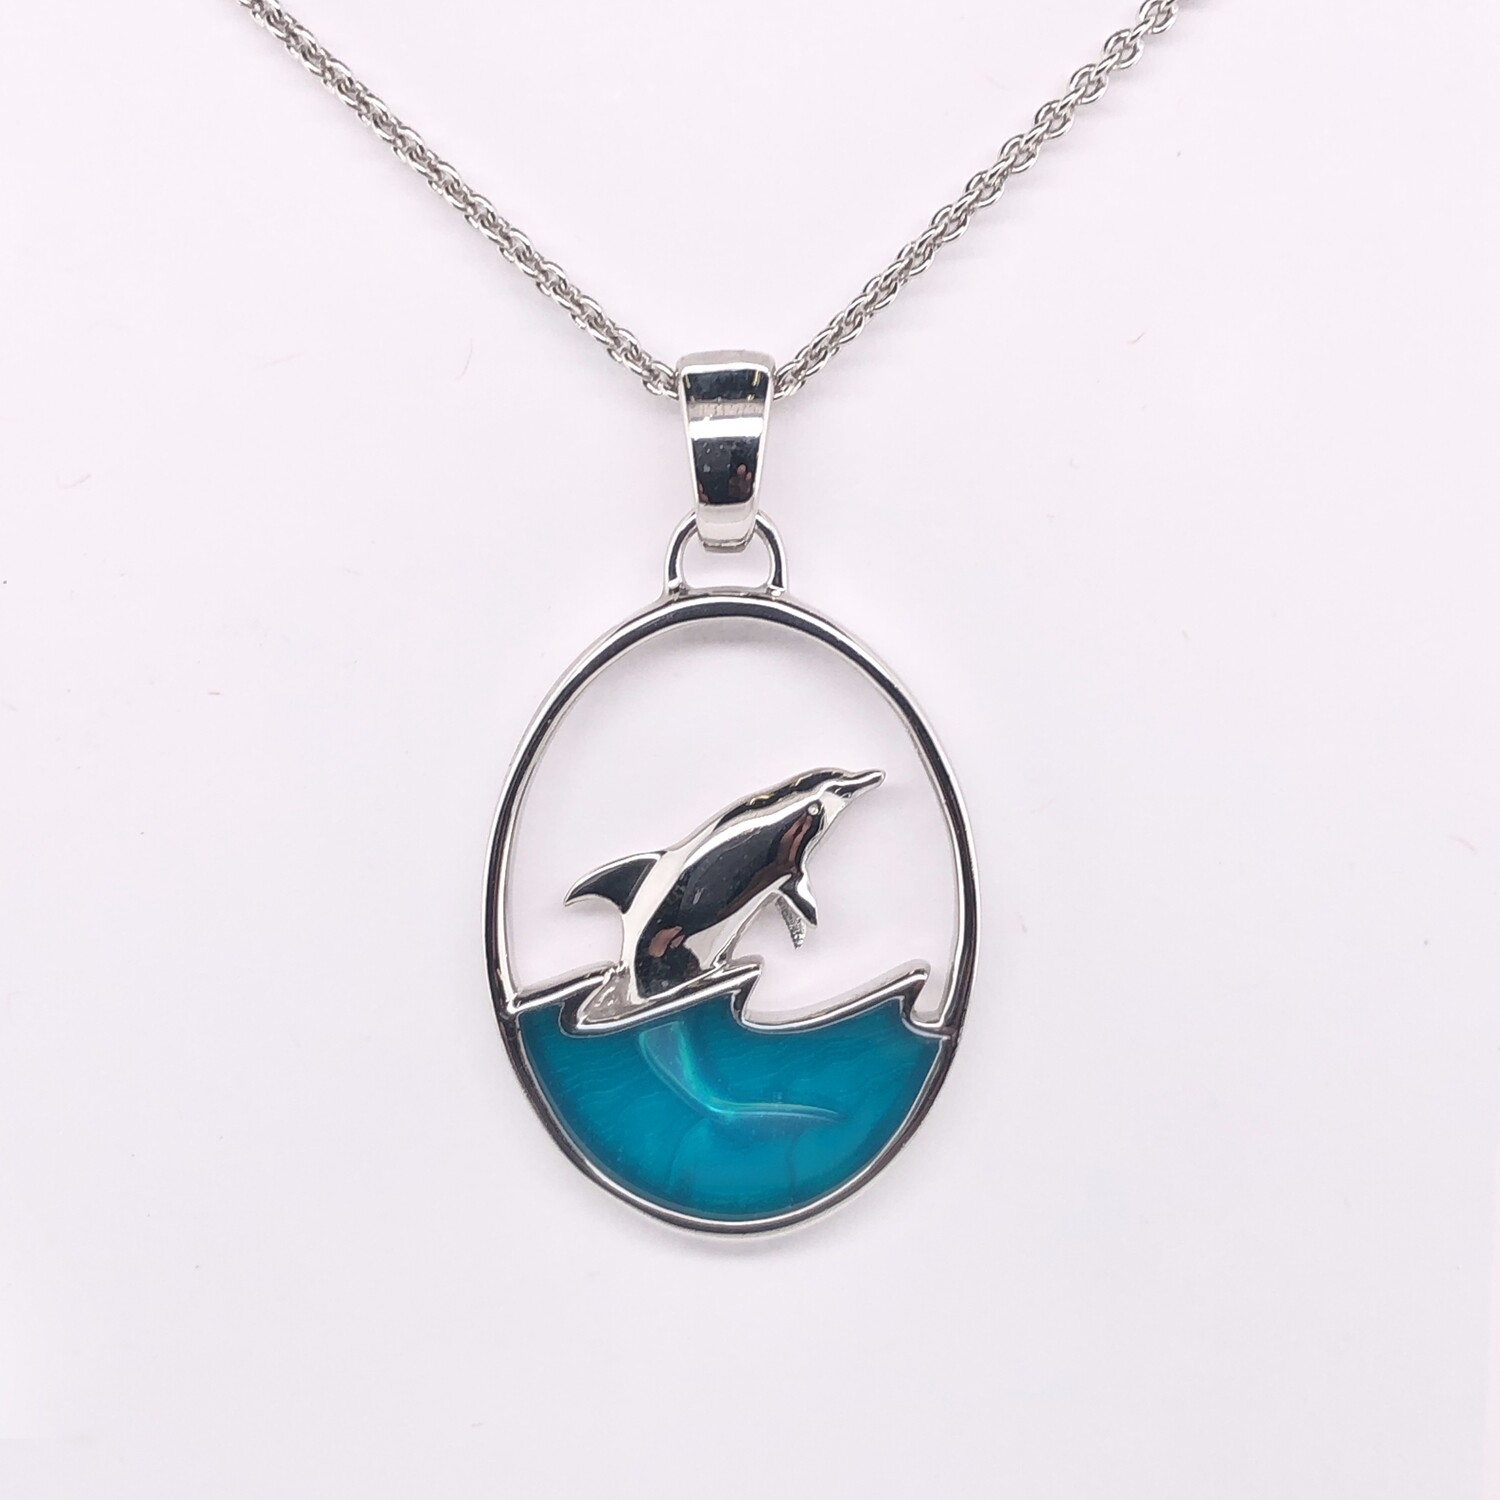 Leaping Dolphin Pendant